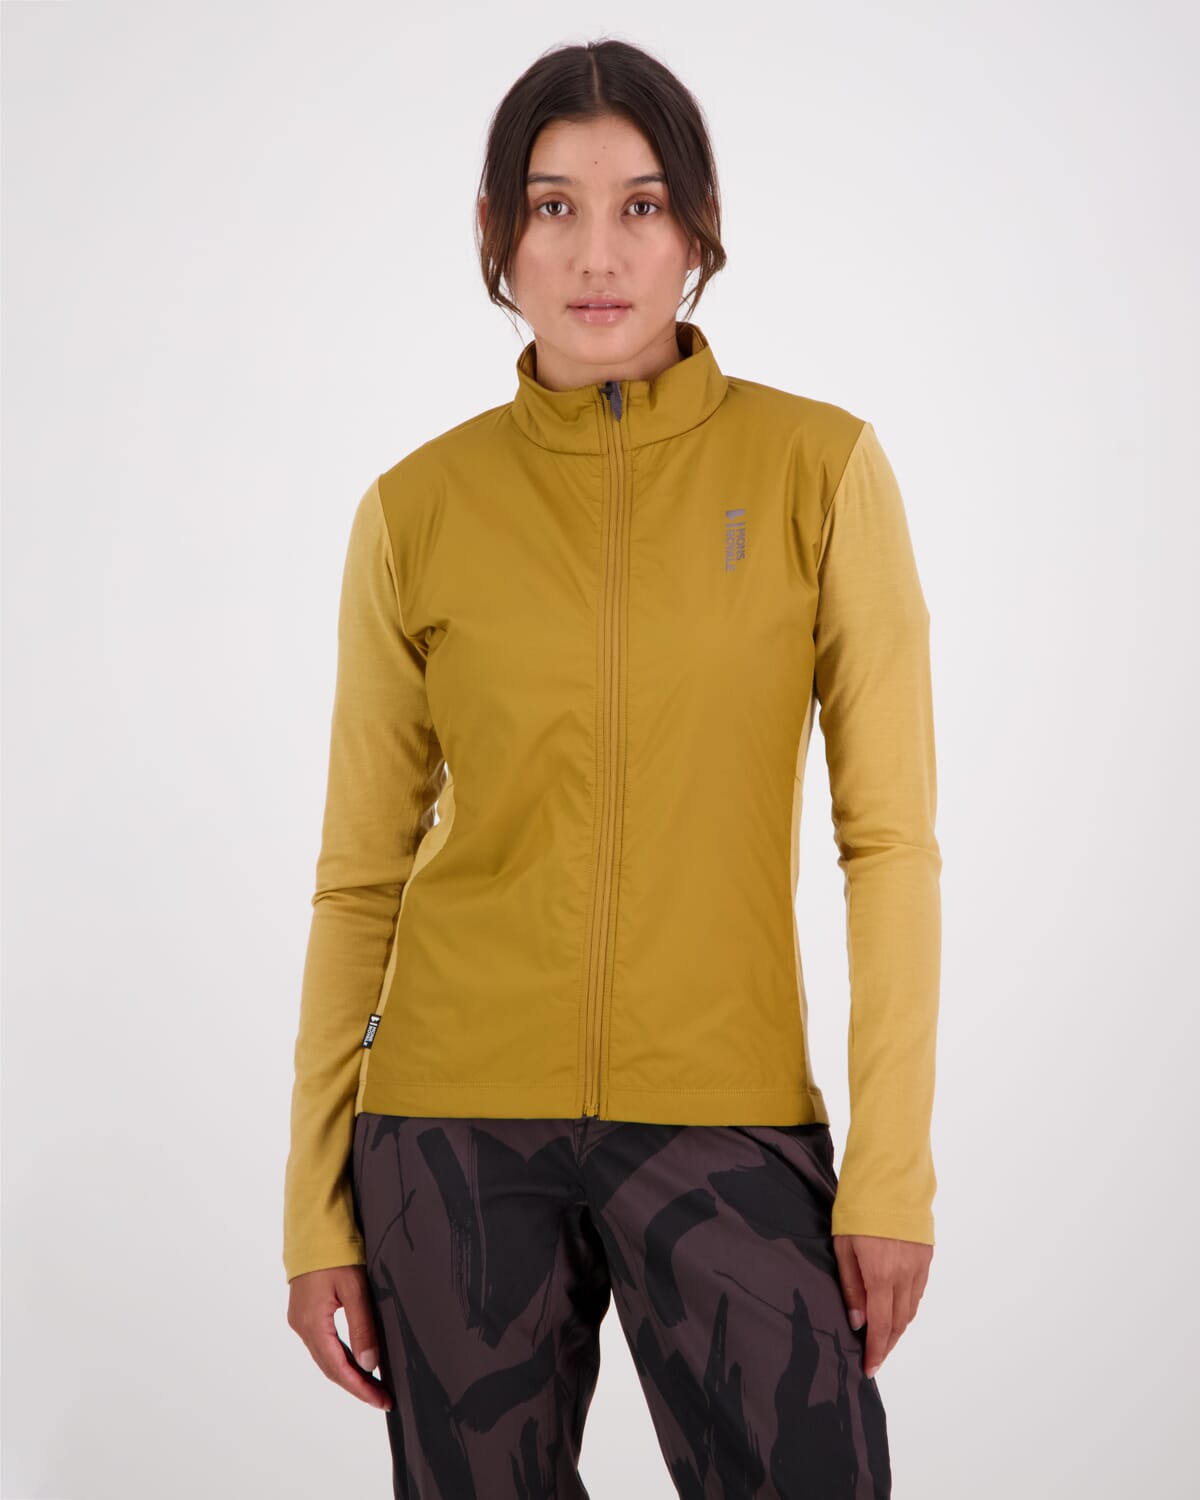 Women's Outer Layer